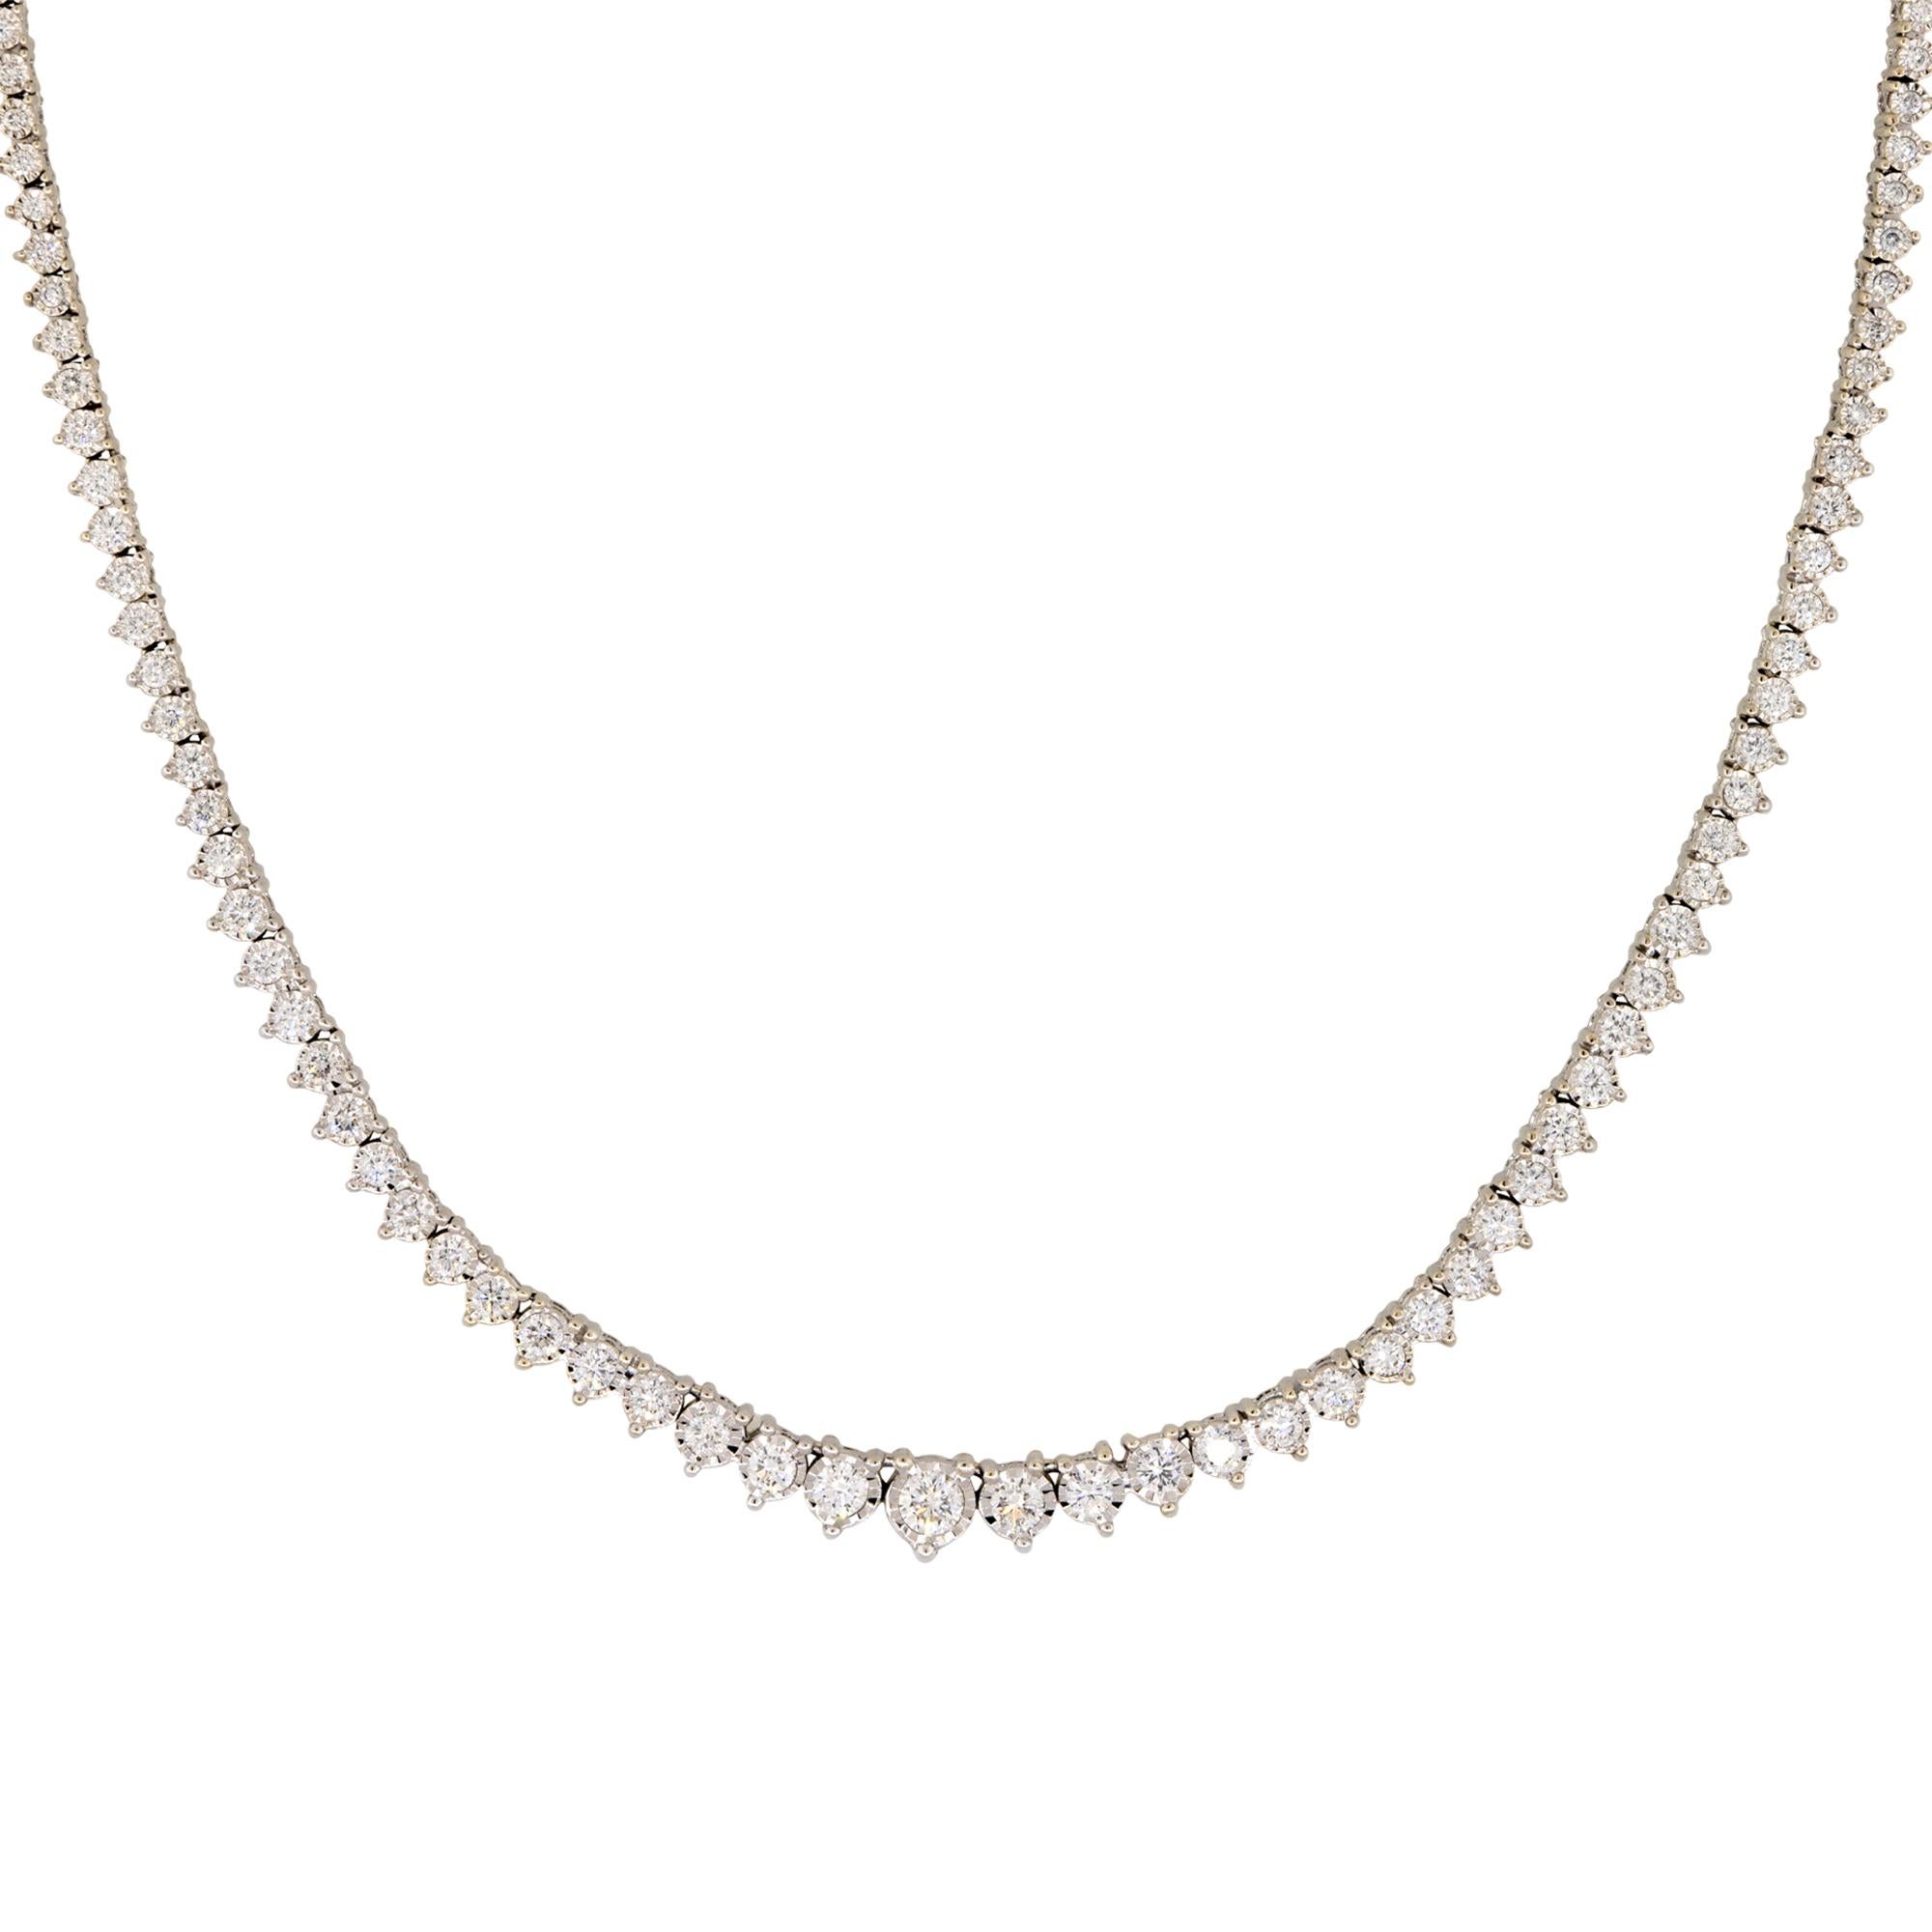 This graduated illusion set diamond tennis necklace is the perfect piece of jewelry for someone who wants the look of larger diamonds. The way this necklace is set uses metal to create the illusion of larger diamonds. At first glance, you can not